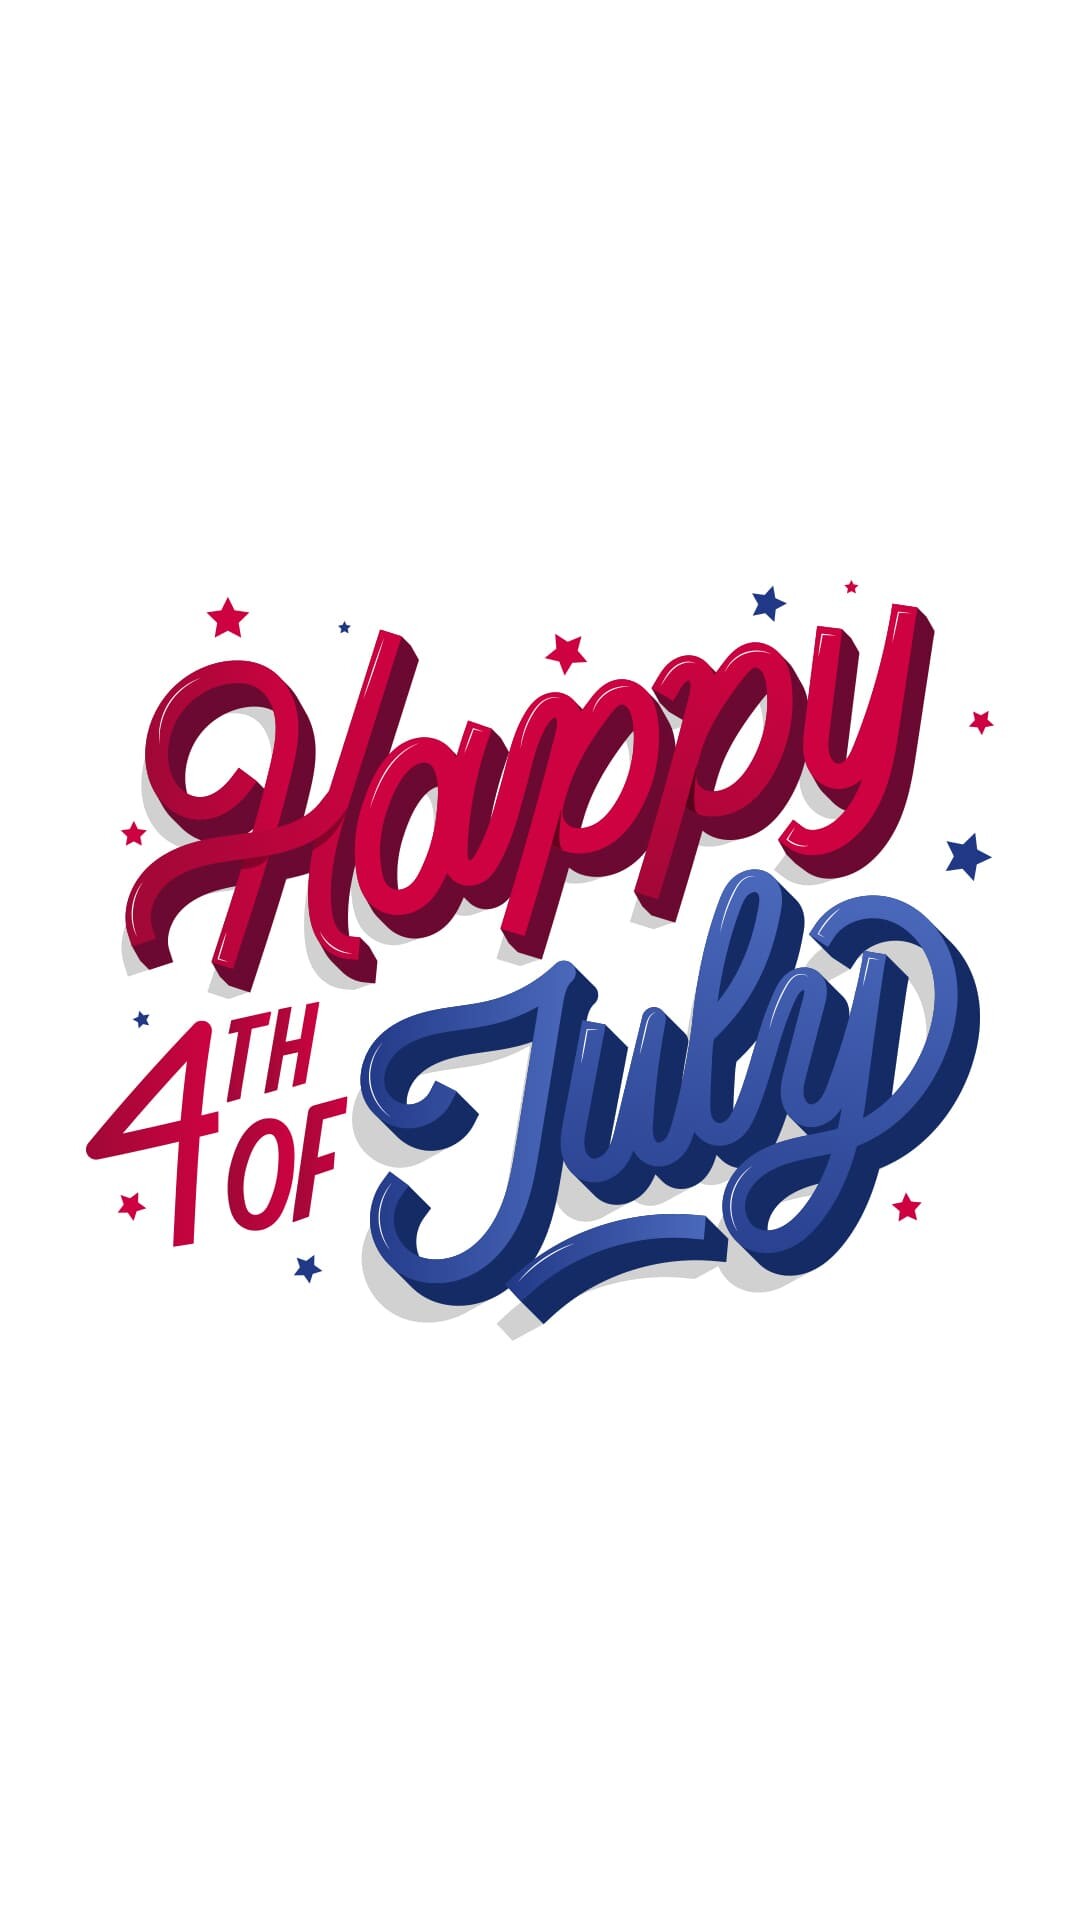 HD wallpaper, Samsung 1080P 4Th Of July Background Image, 1080X1920 Full Hd Phone, 4Th Of July Wallpapers, Vibrant Visuals, Festive Atmosphere, High Quality Backgrounds